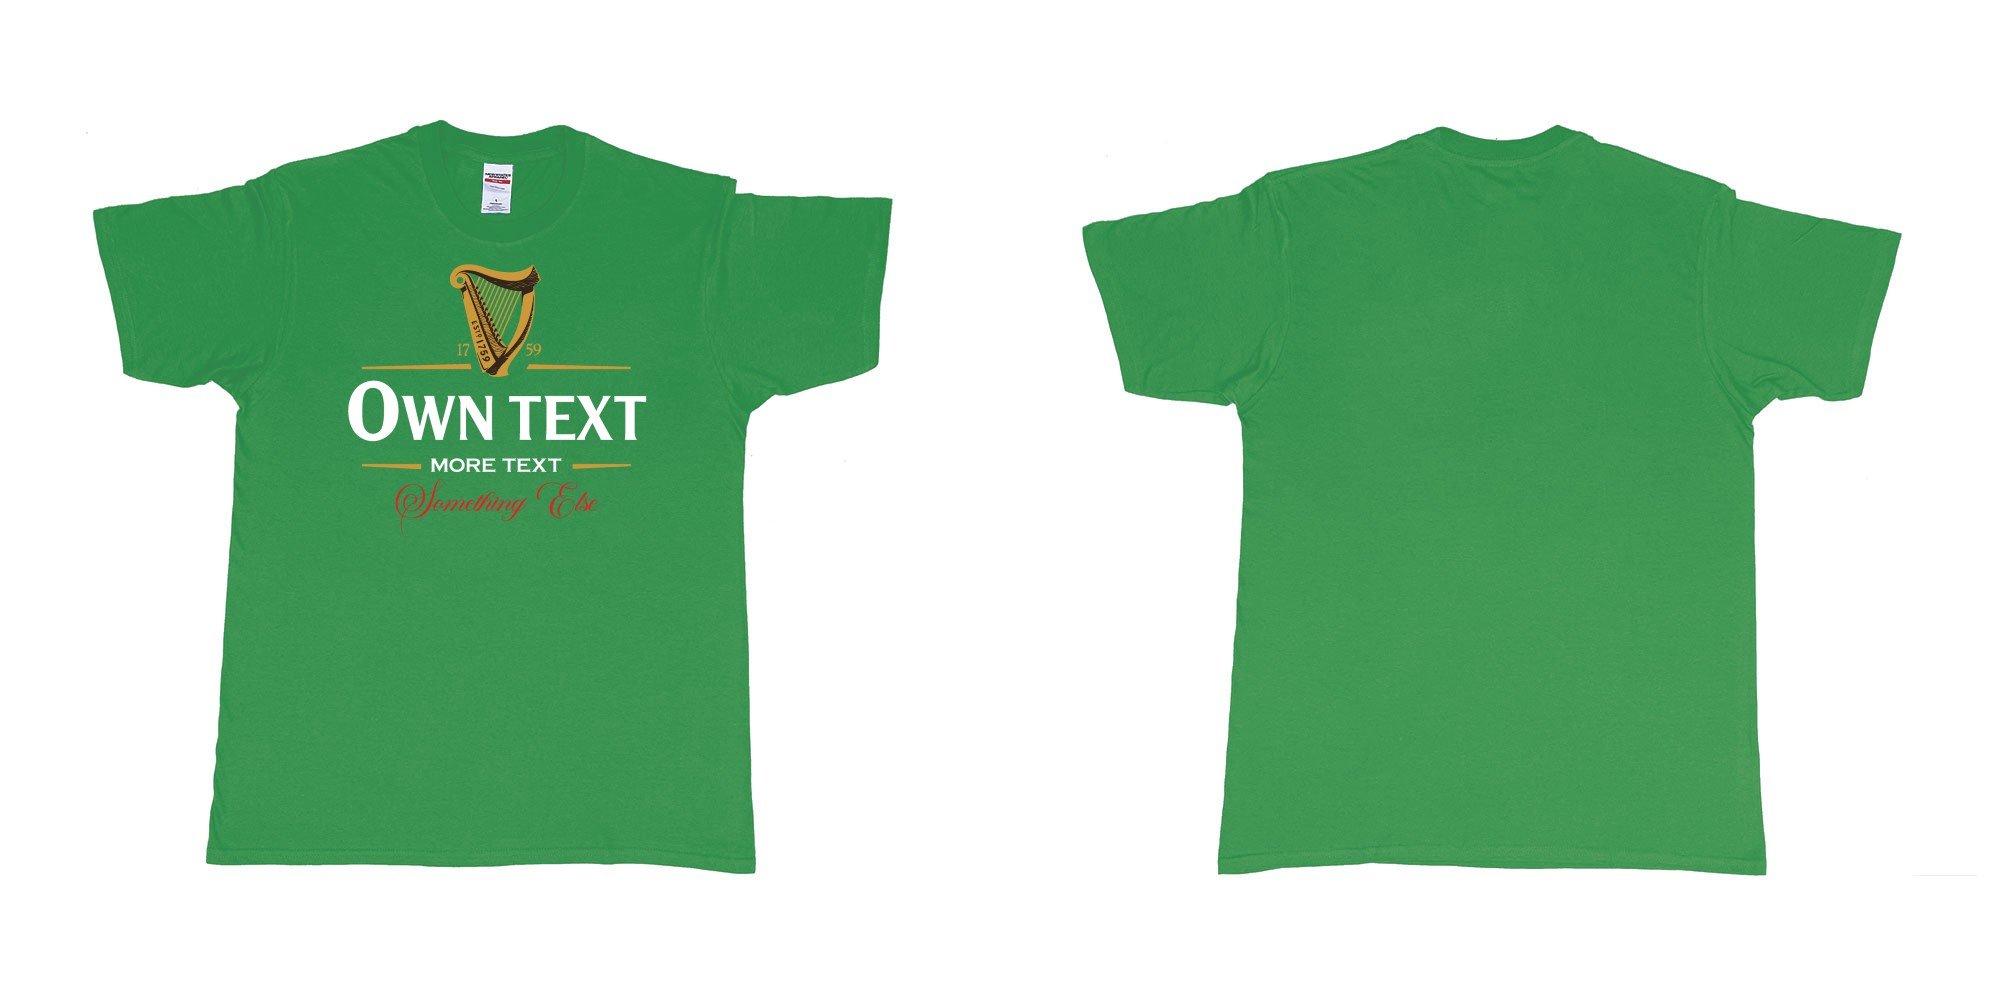 Custom tshirt design guinness beer custom text teeshirt printing in fabric color irish-green choice your own text made in Bali by The Pirate Way